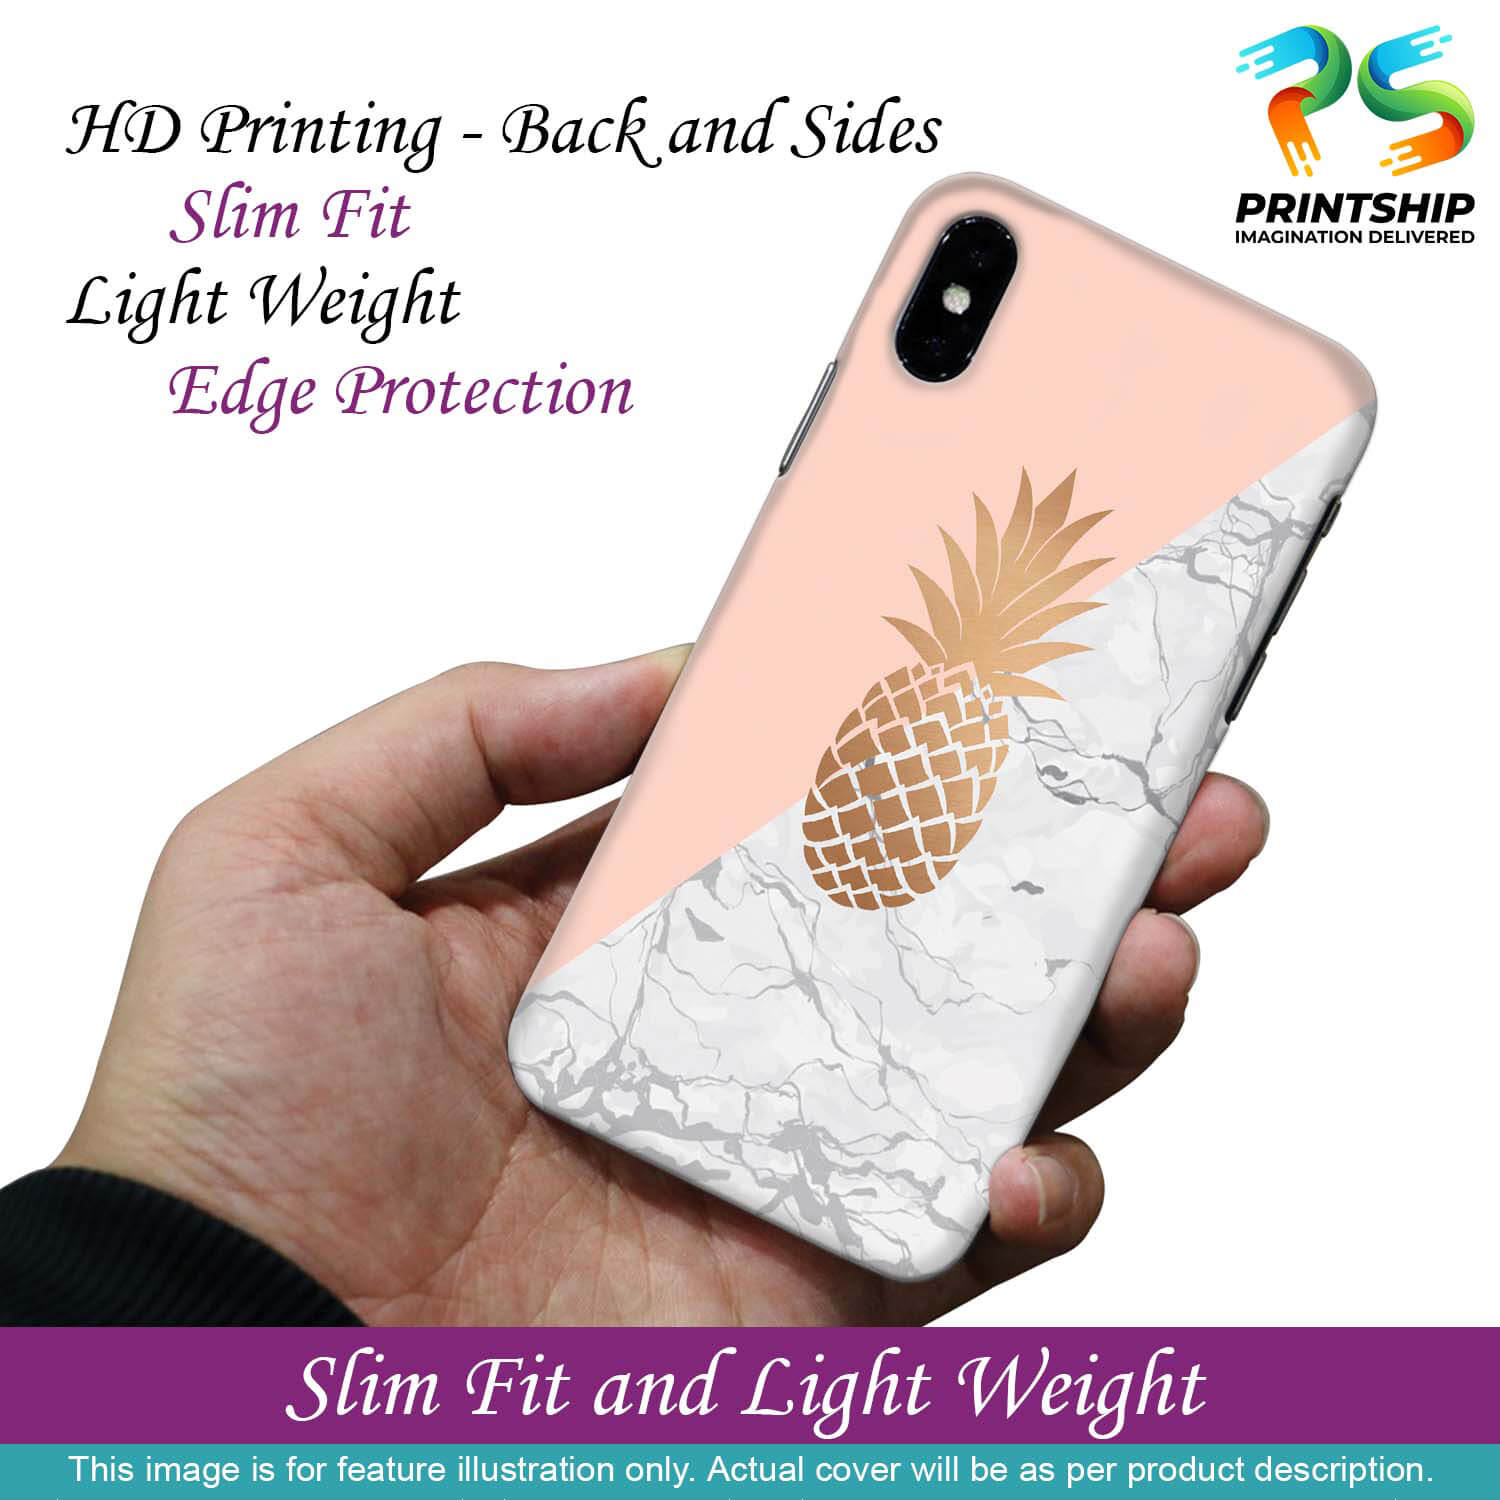 PS1330-Pineapple Marble Back Cover for Oppo A12